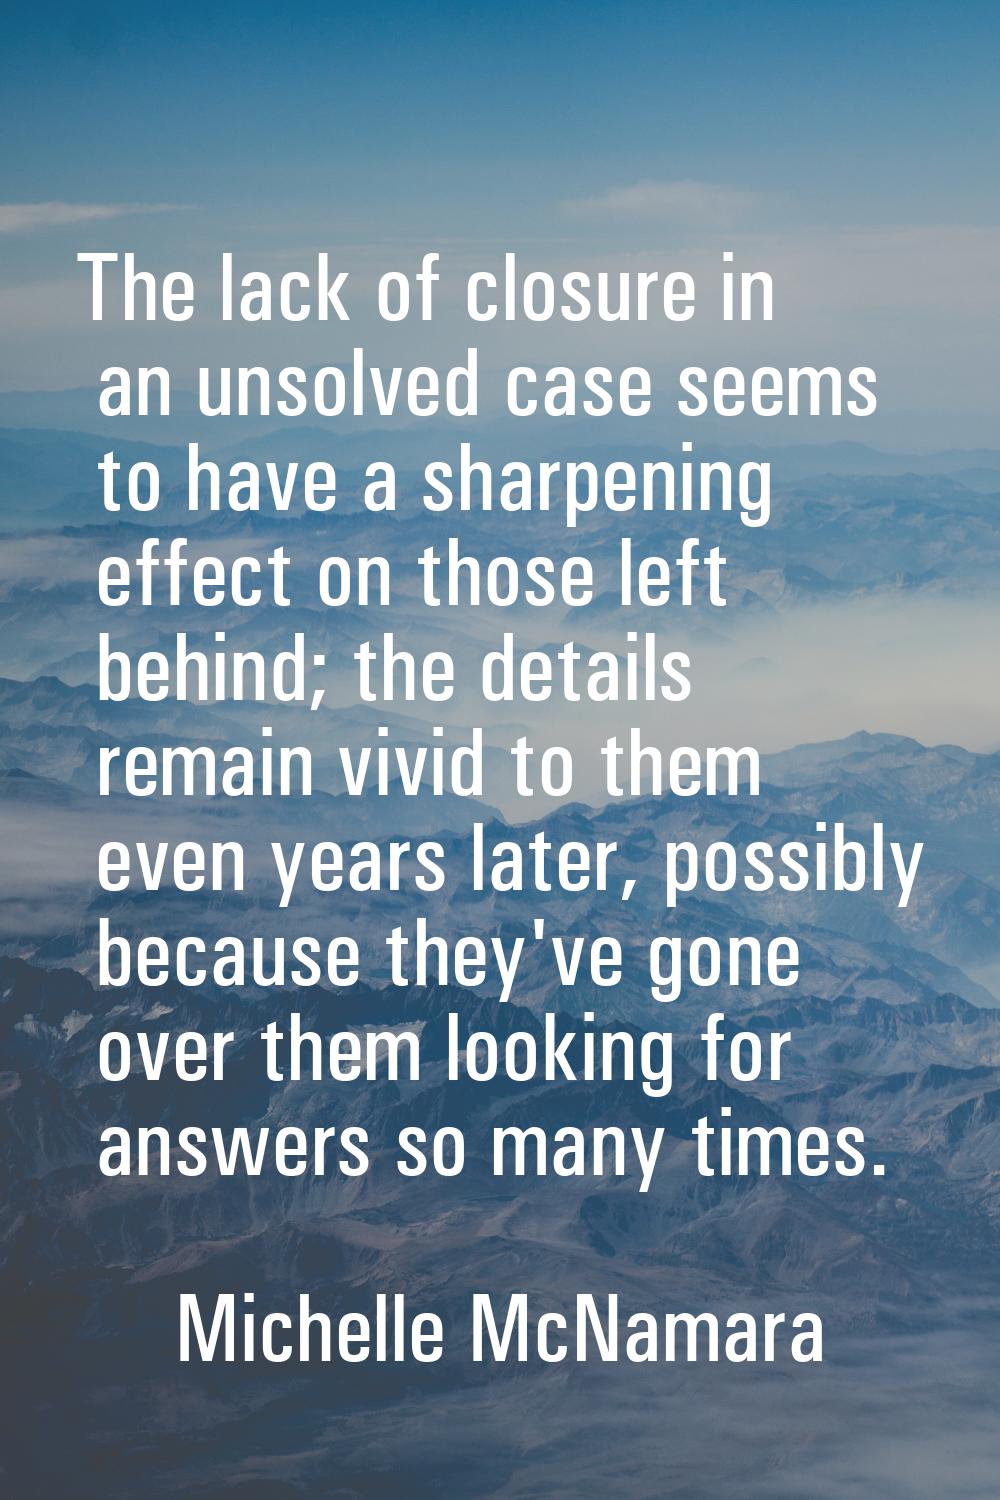 The lack of closure in an unsolved case seems to have a sharpening effect on those left behind; the